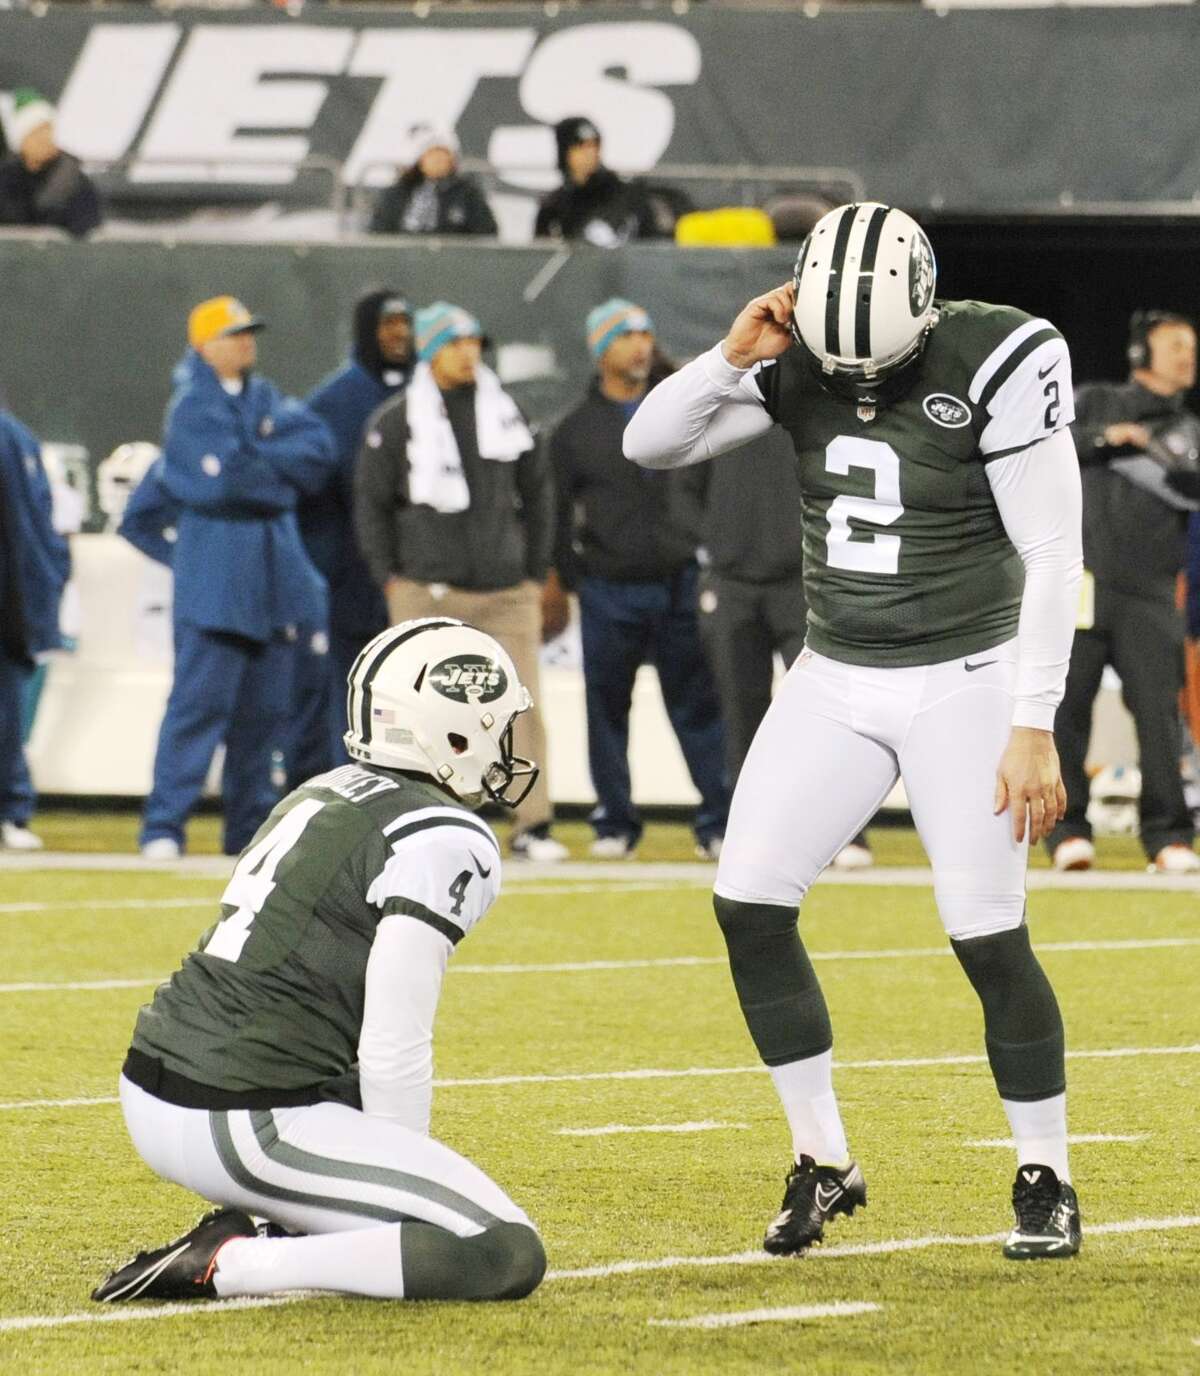 New York Jets kicker Nick Folk (2) reacts after missing a 45-yard field goal against the Miami Dolphins on Monday in East Rutherford, N.J.